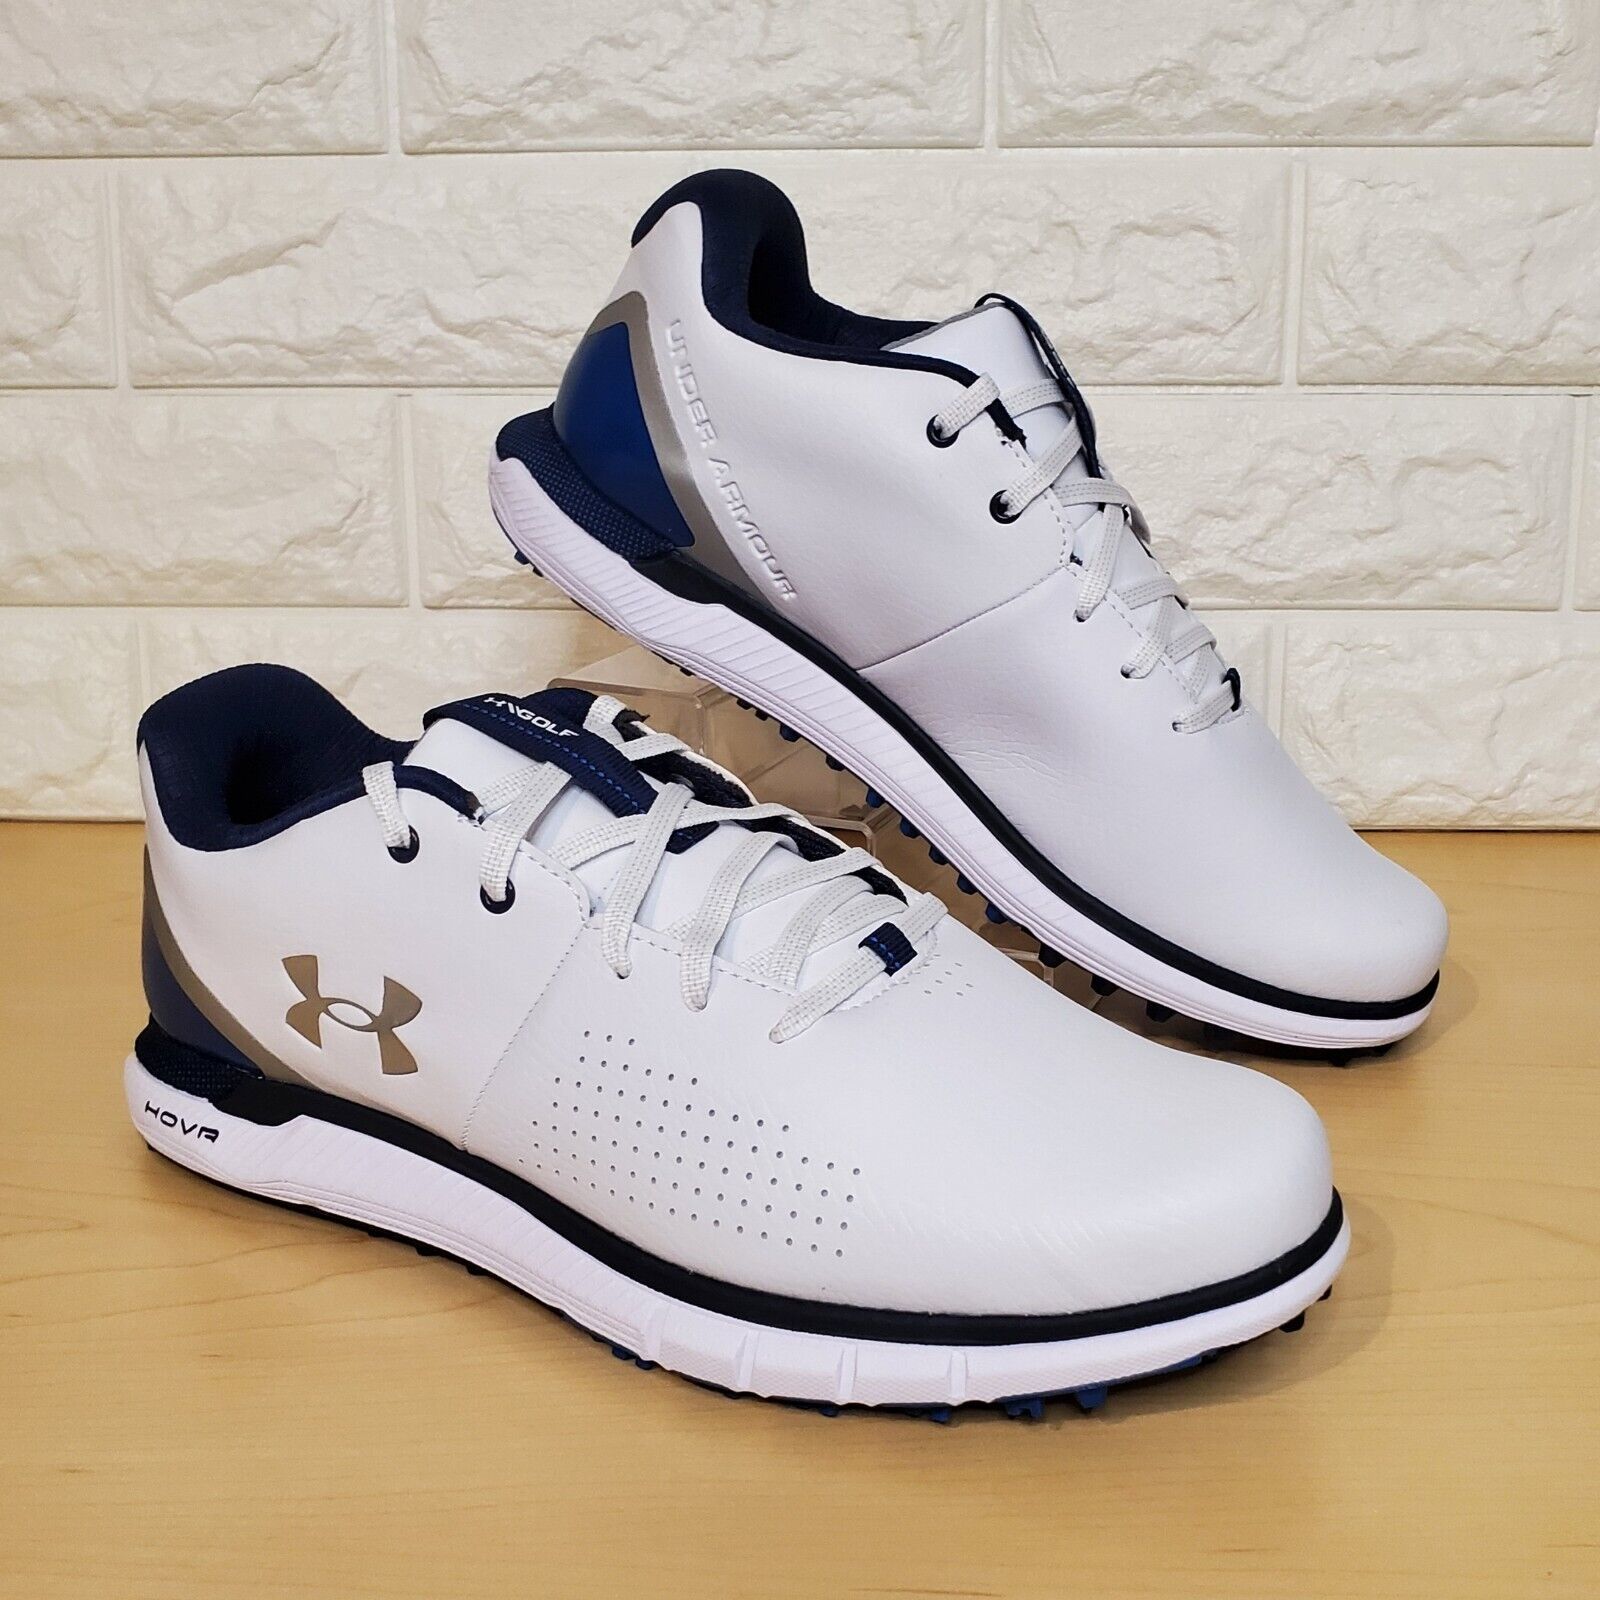 Primary image for Under Armour Mens 9 UA HOVR Fade 2 Spikeless Golf Shoes White Blue 3025379-101